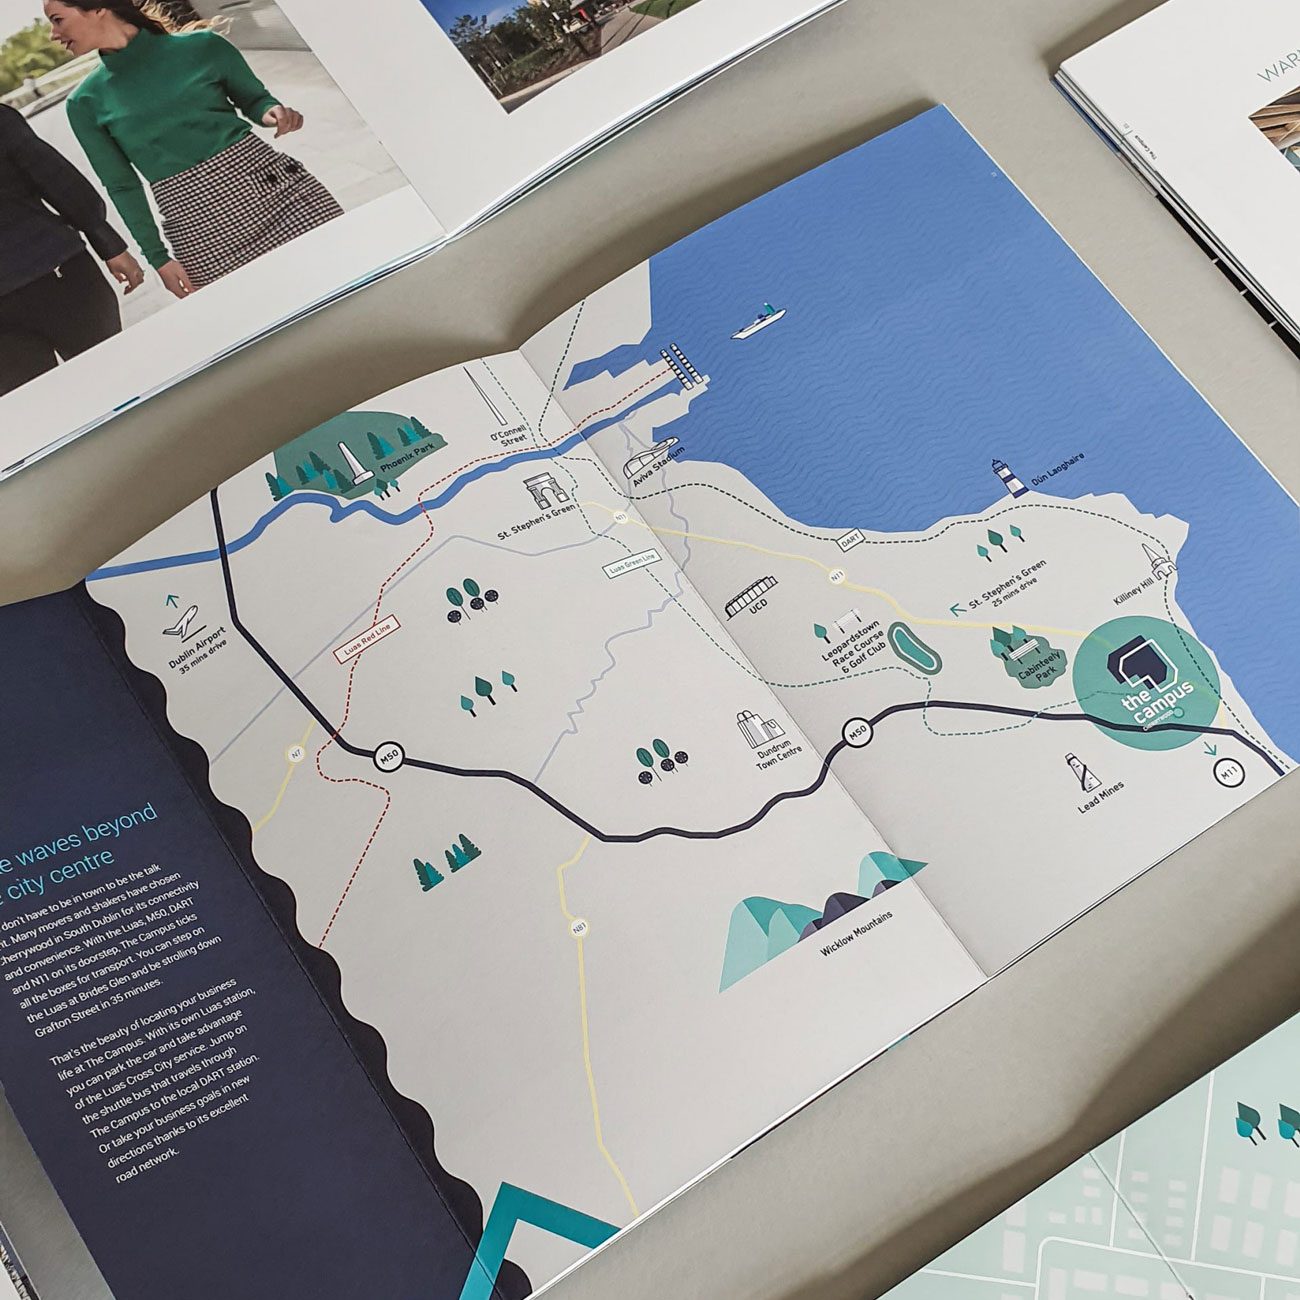 Brochure design including printed map of the Campus at Cherrywood